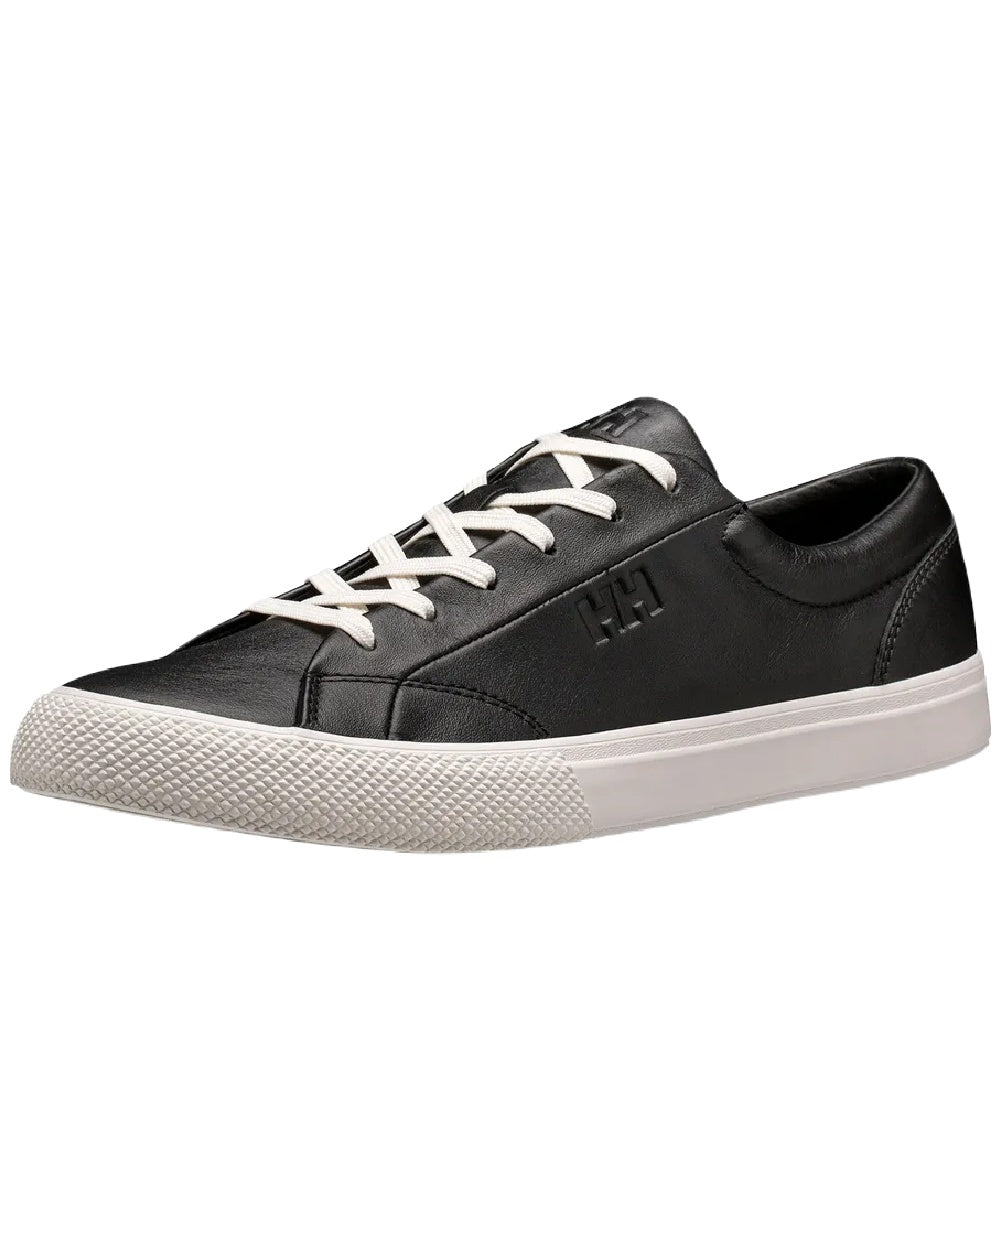 Helly Hansen Womens Fjord Shoes in Black 